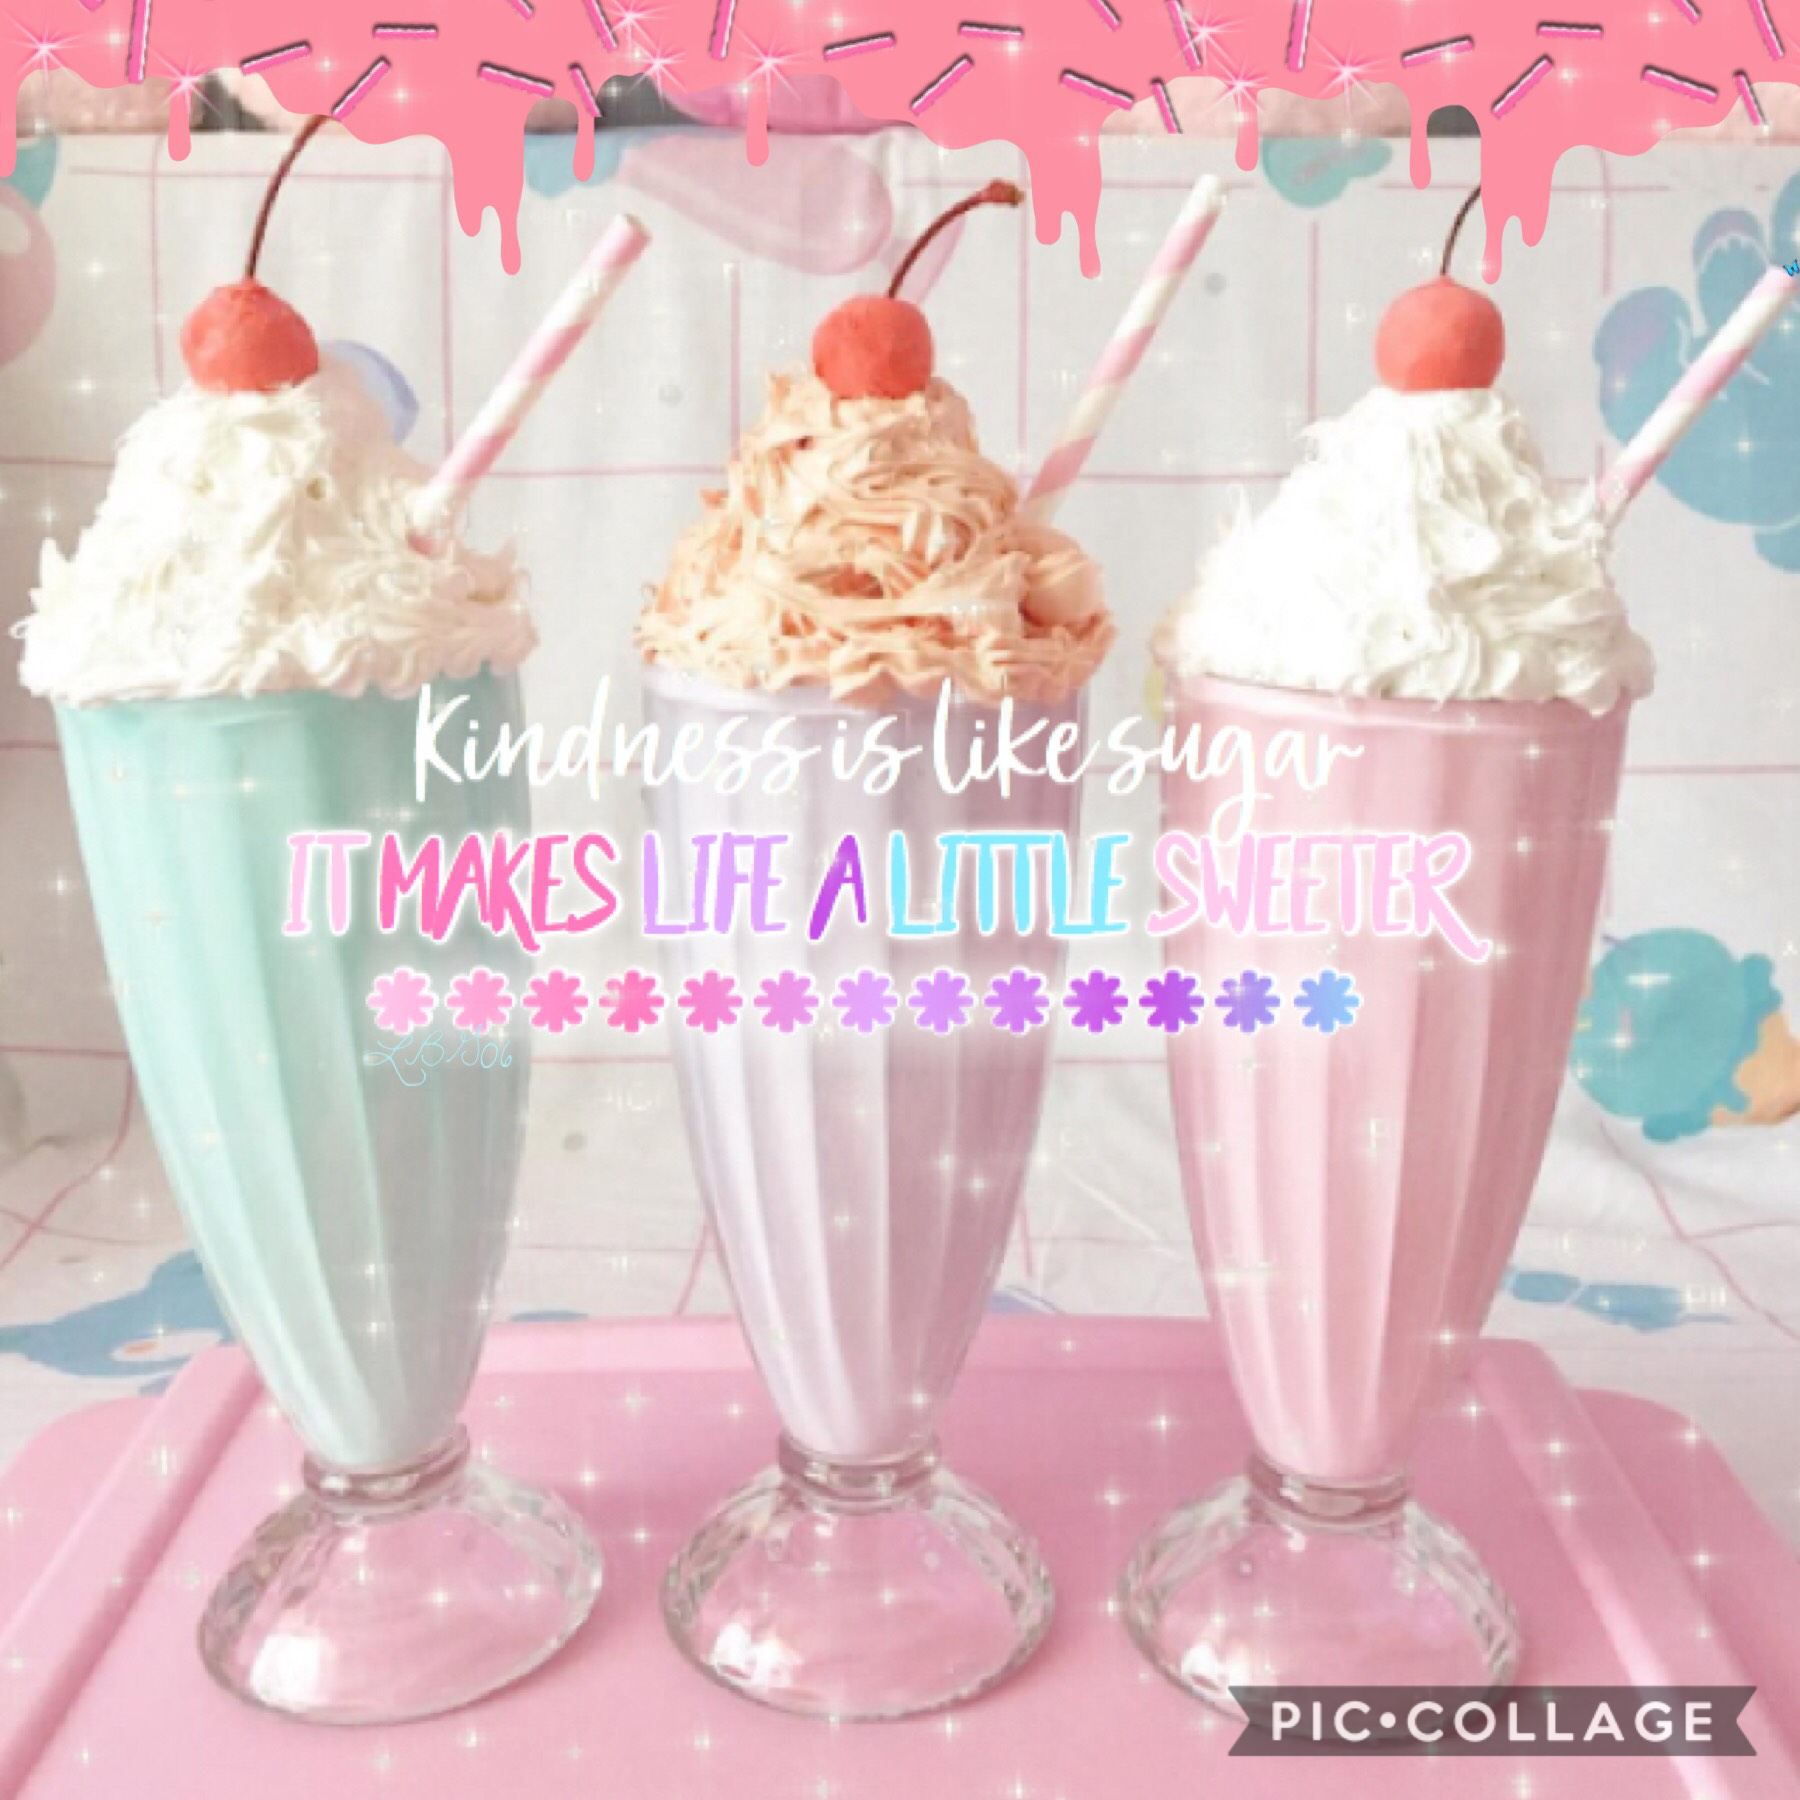 Tap

Help! I have lost my butterfly! Can you help me find her? She is hiding in some of my collages! First person to find her gets a shoutout! 🦋

QOTD: YA LIKE MILKSHAKES?
AOTD: YAAAASSS💗💗

xoxox ❤️